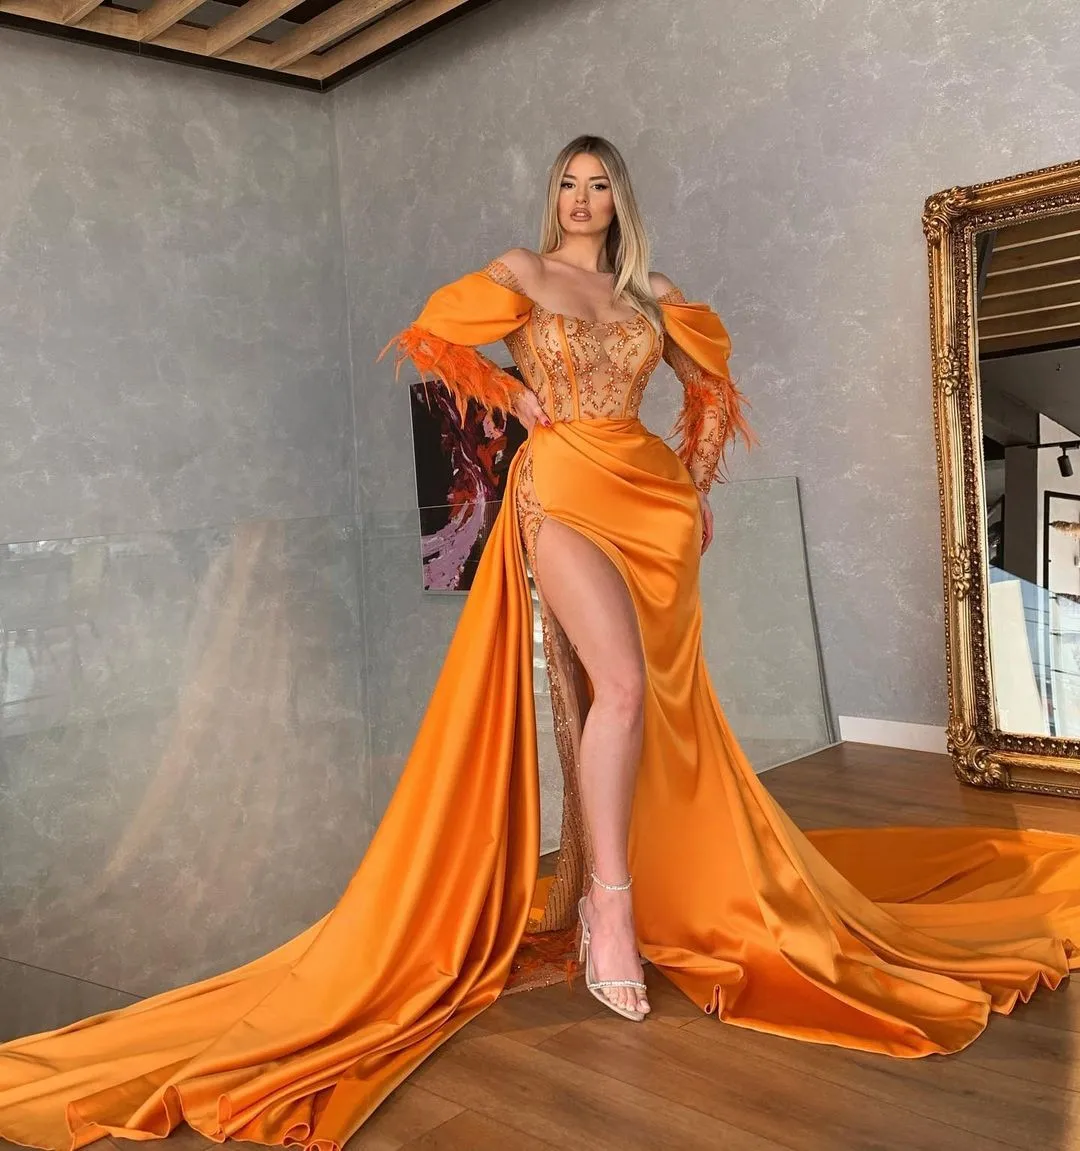 BridalAffair New 2022 Gorgeous Orange Mermaid Prom Dresses Feathers Side Split With Train Satin Beaded Party Evening Gowns